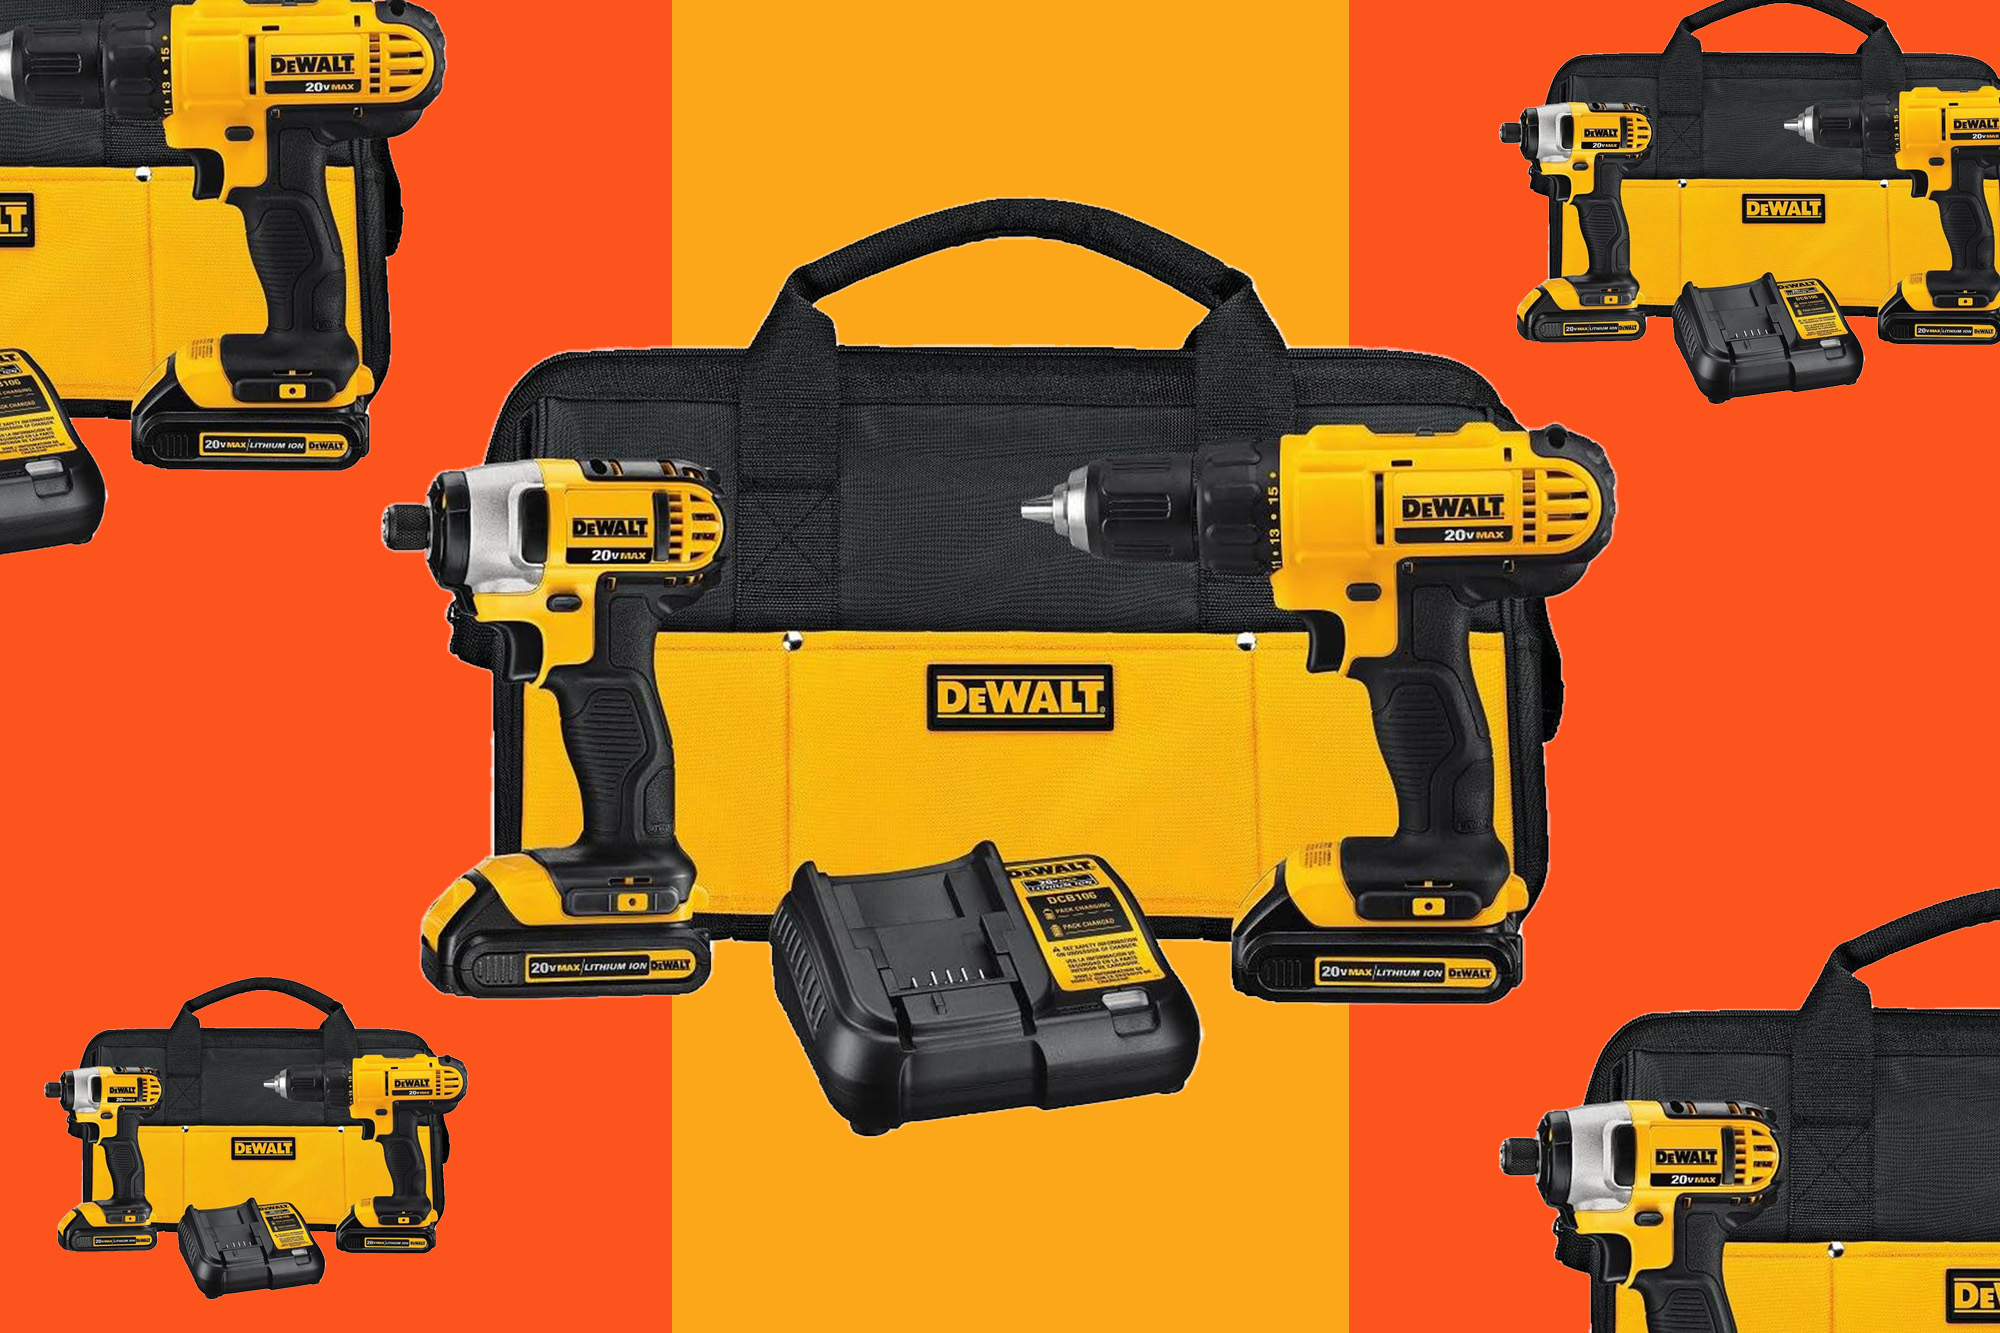 Dads love this DeWalt set, and it's available for $100 off today on Amazon